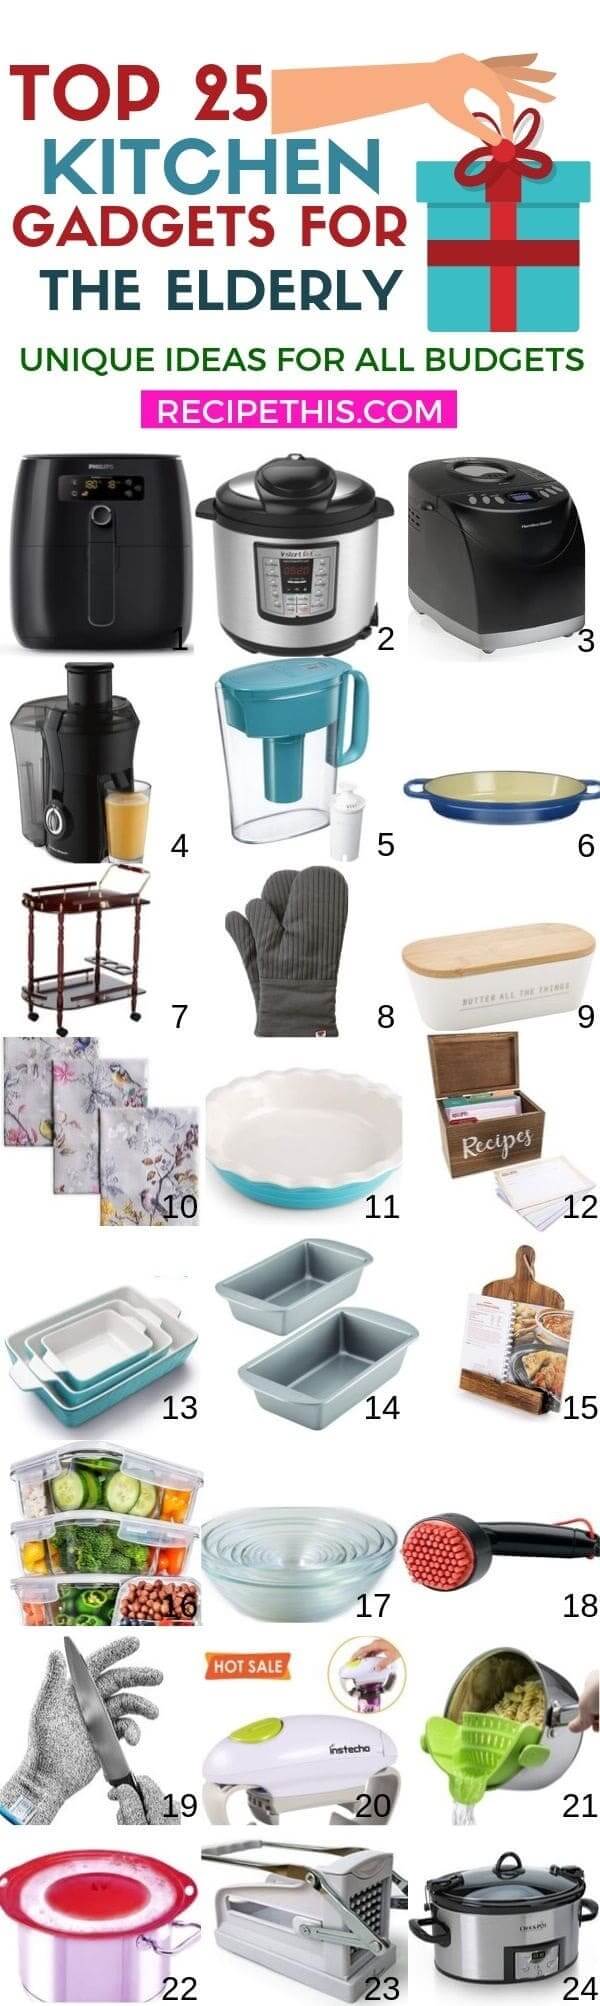 The Top 25 Kitchen Gadgets For The Elderly